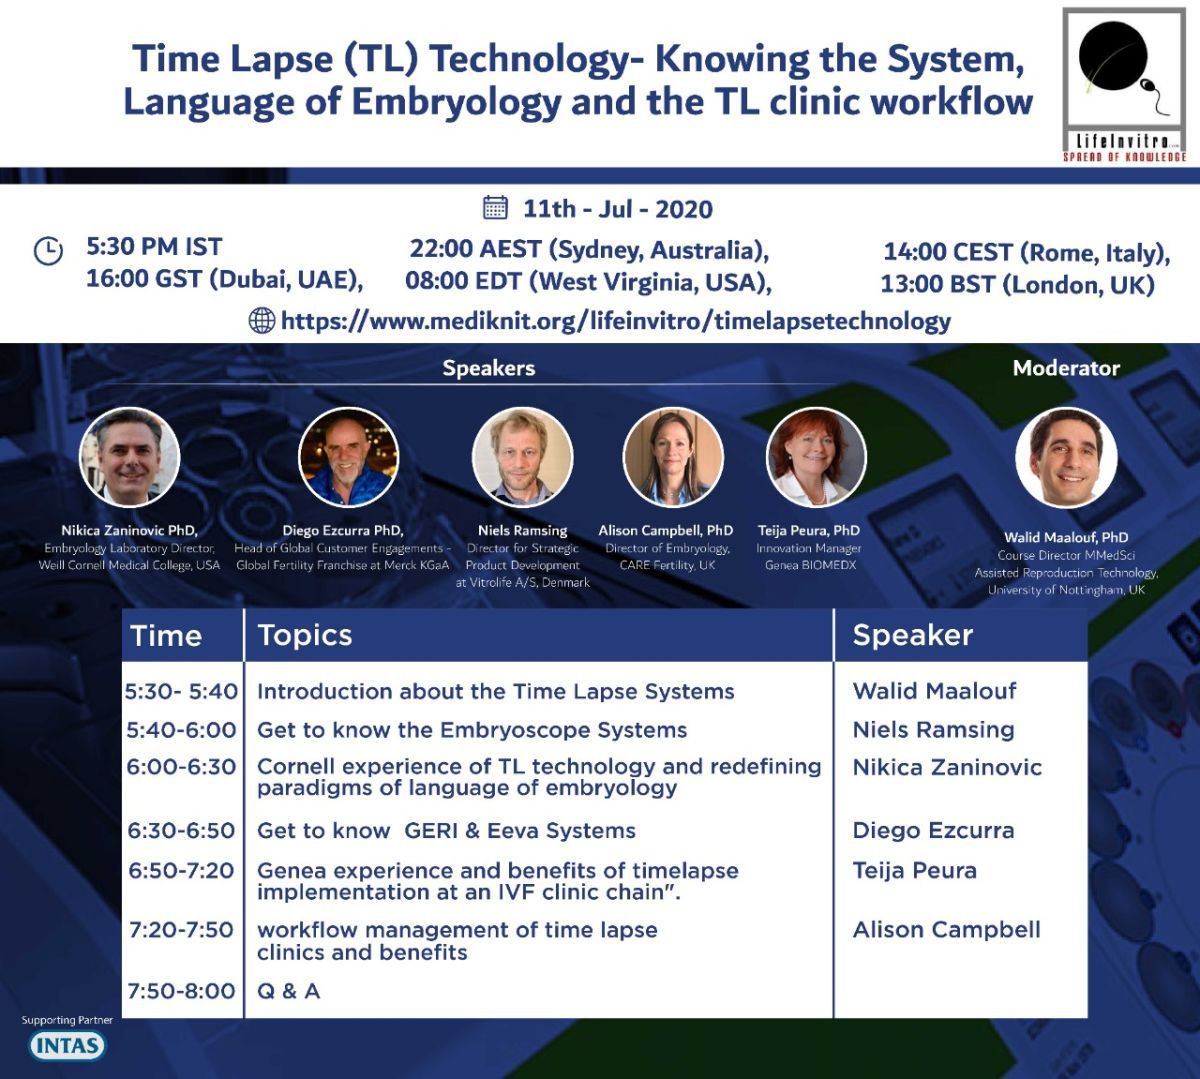 Webinar on Time Lapse (TL) Technology- Knowing the System, Language of Embryology and the TL clinic workflow